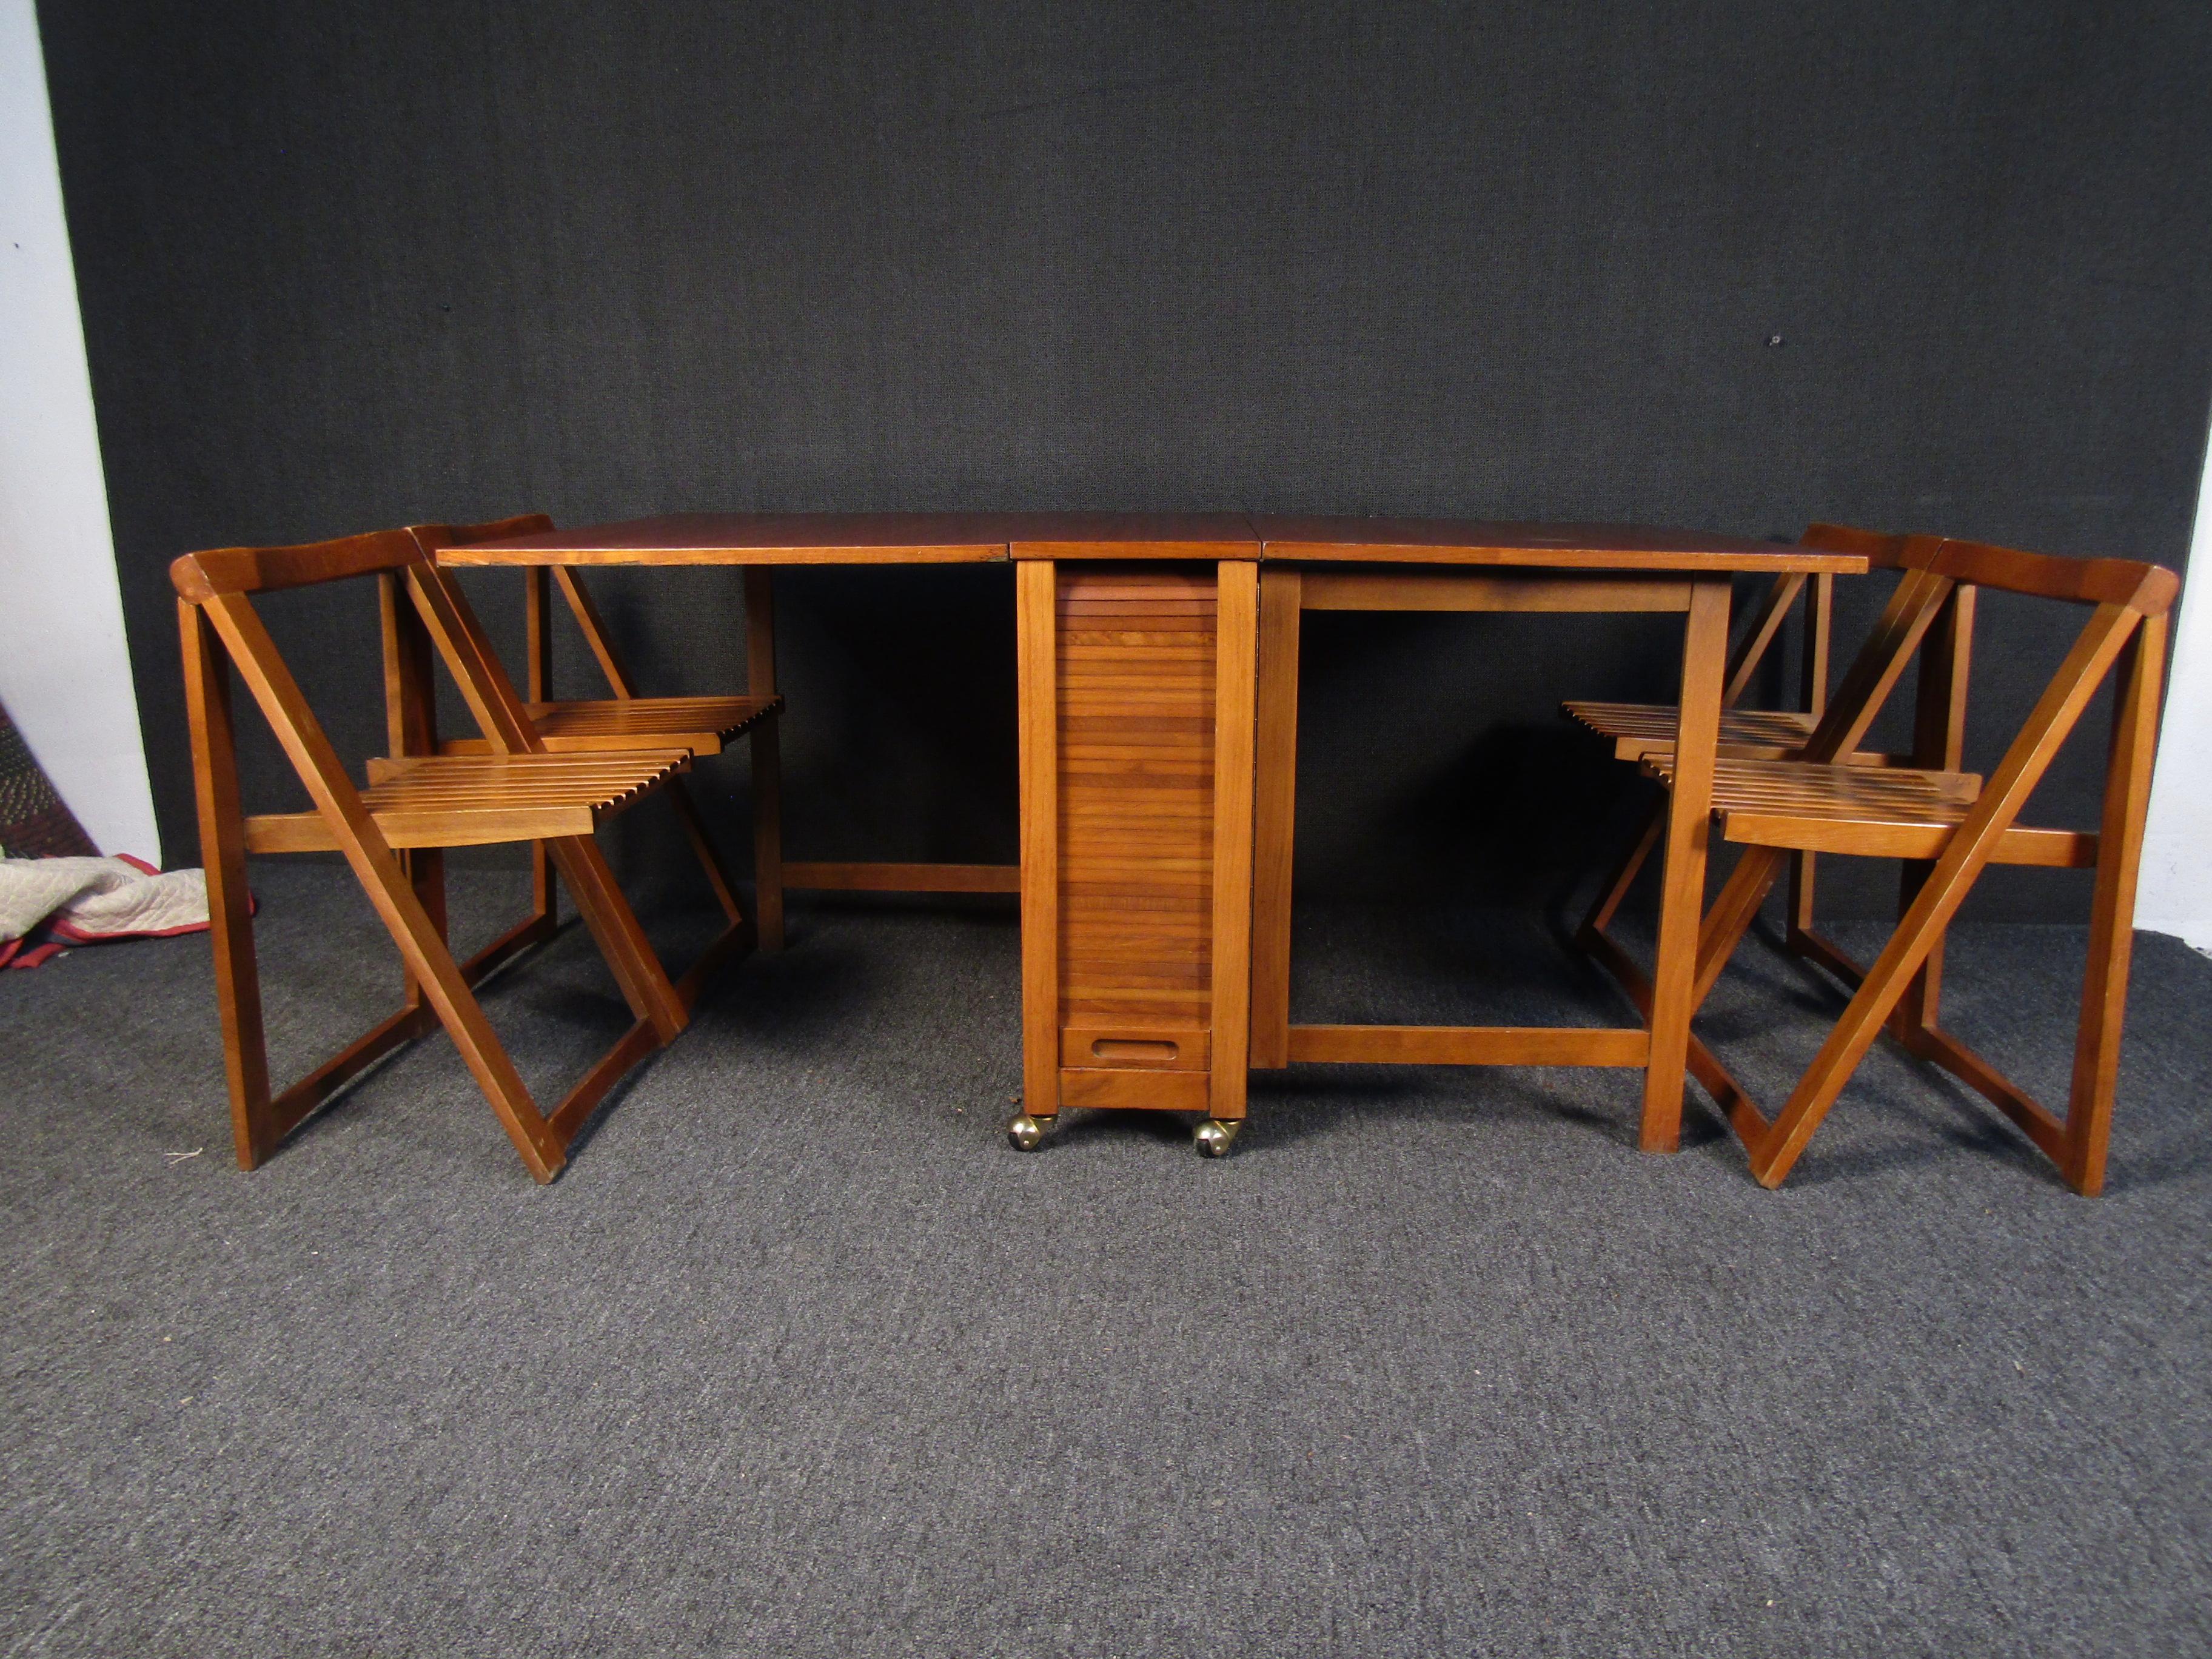 A vintage rolling drop leaf table with four folding chairs that stow away inside the table. With a design that allows one or either side to be folded down, this versatile dining room set can work in a large or smaller space. 
Please confirm item